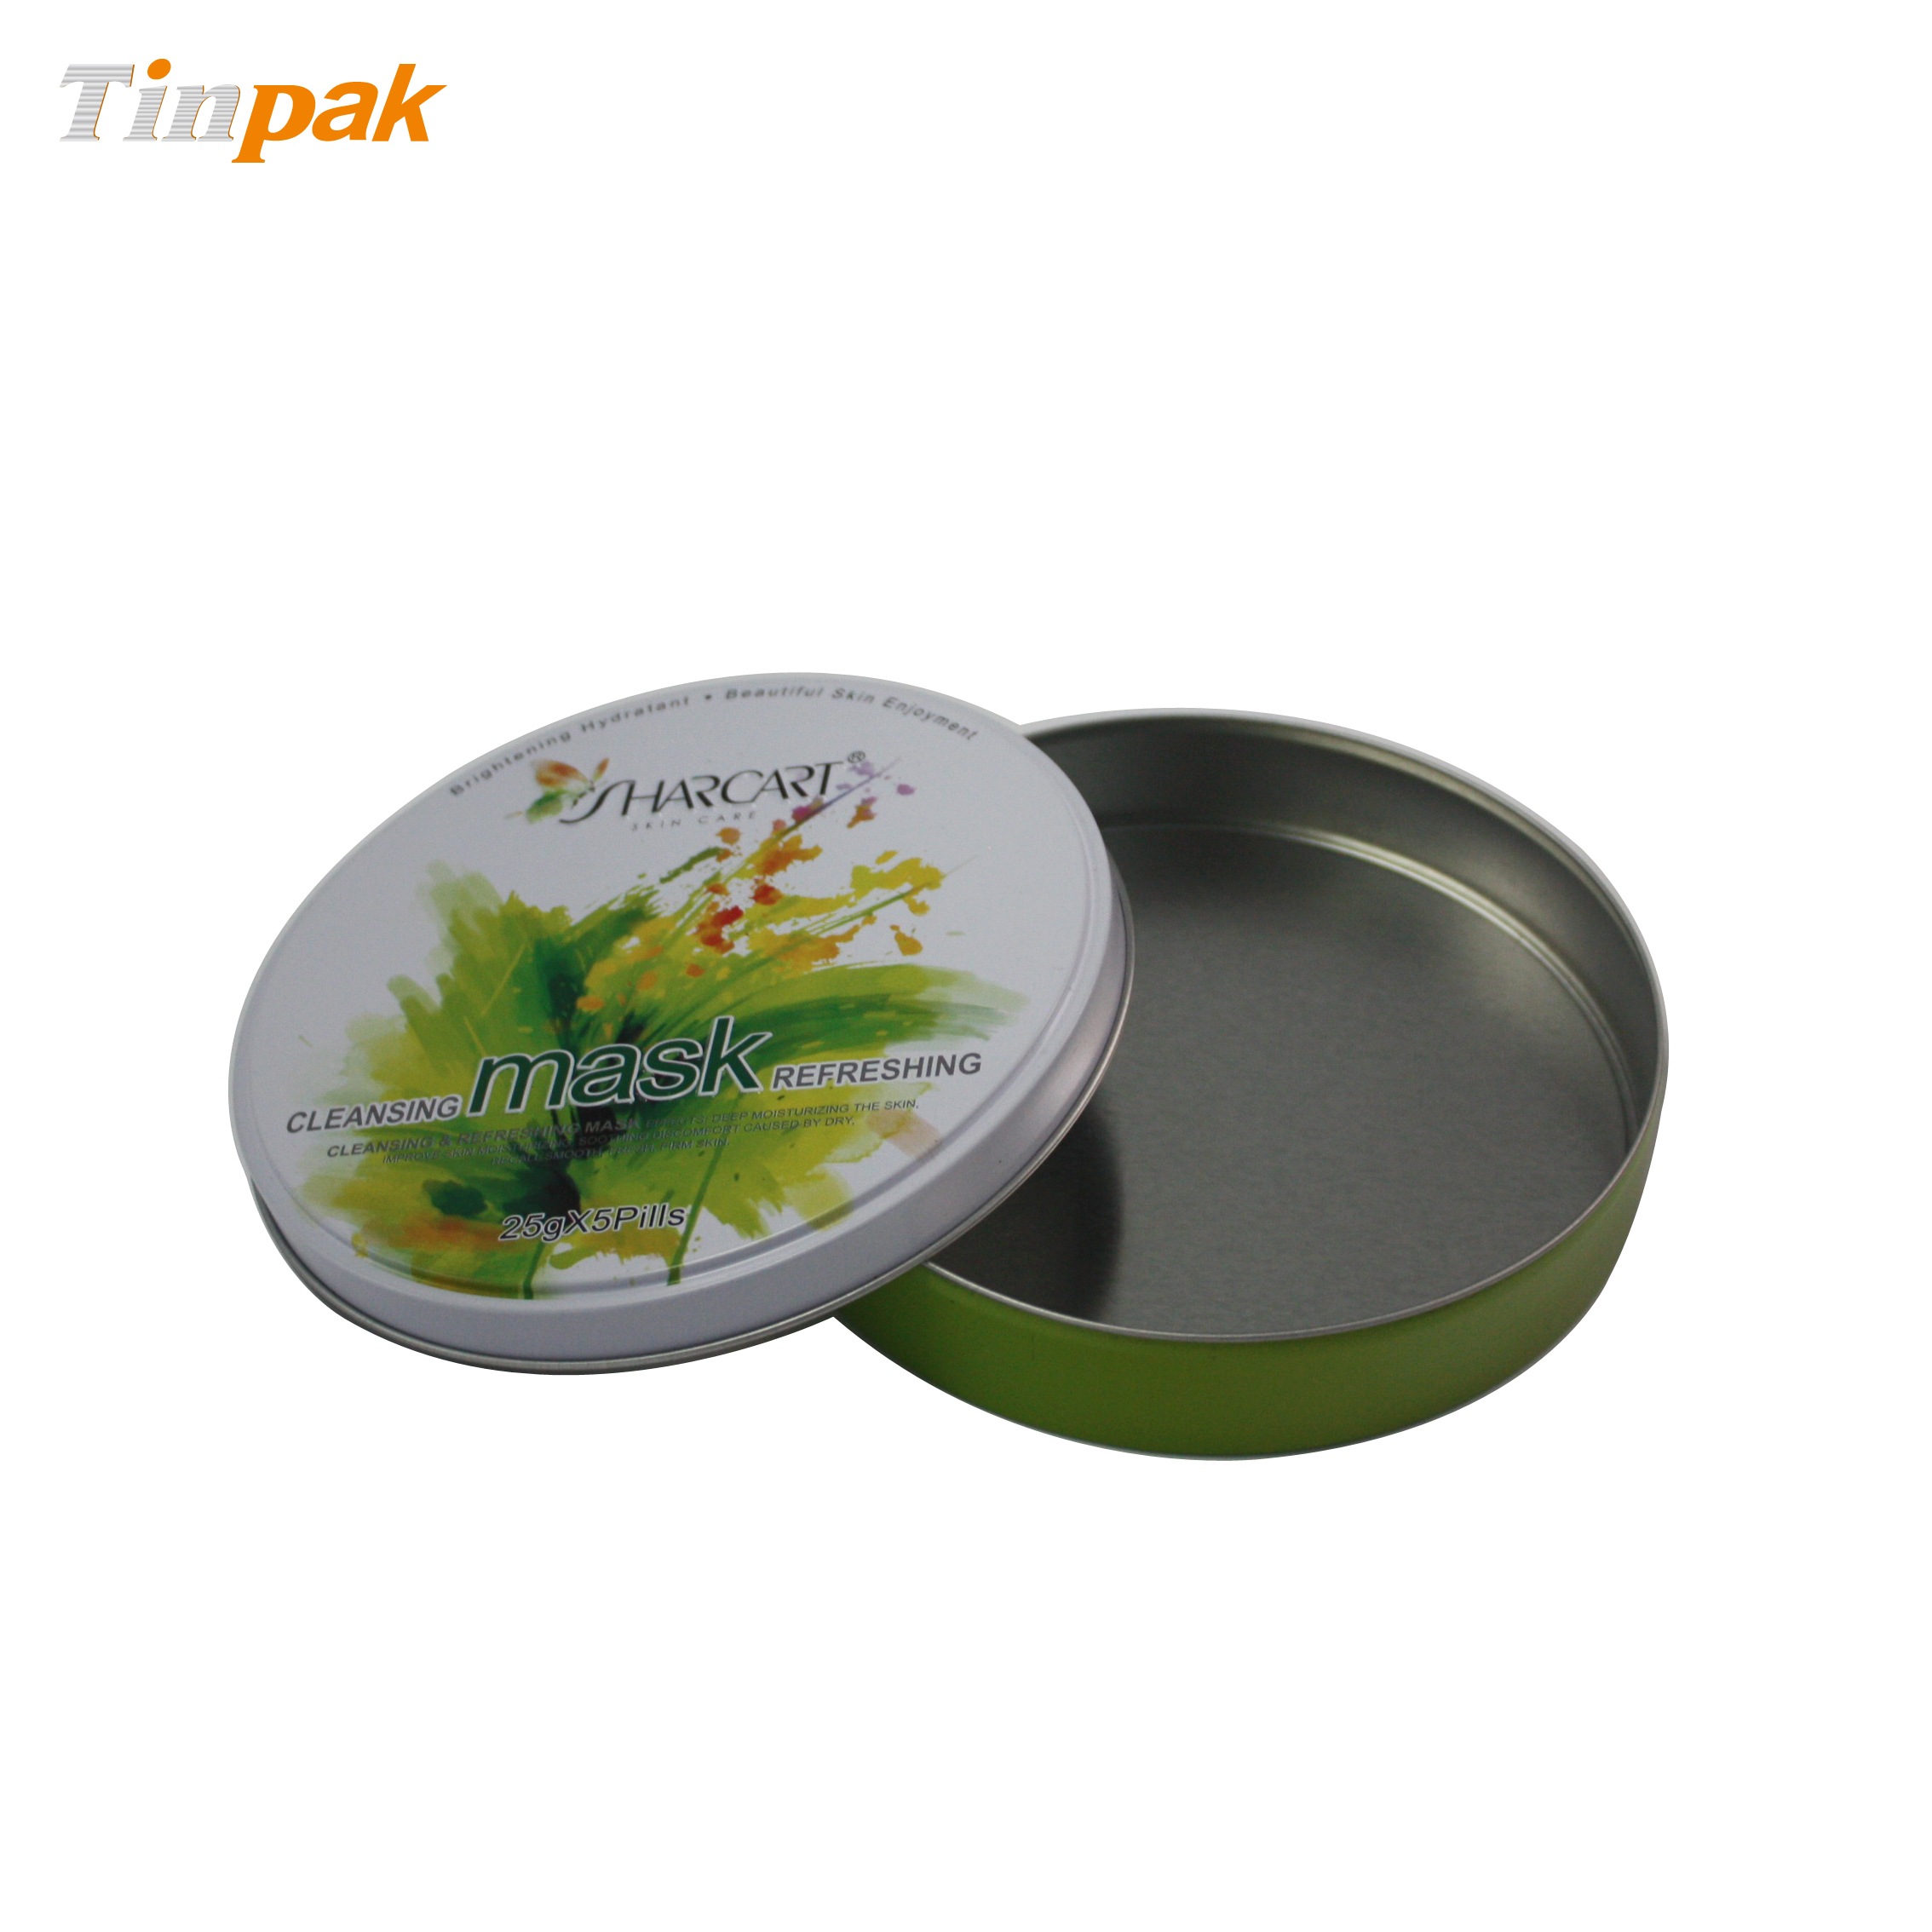 Round cosmetic tins